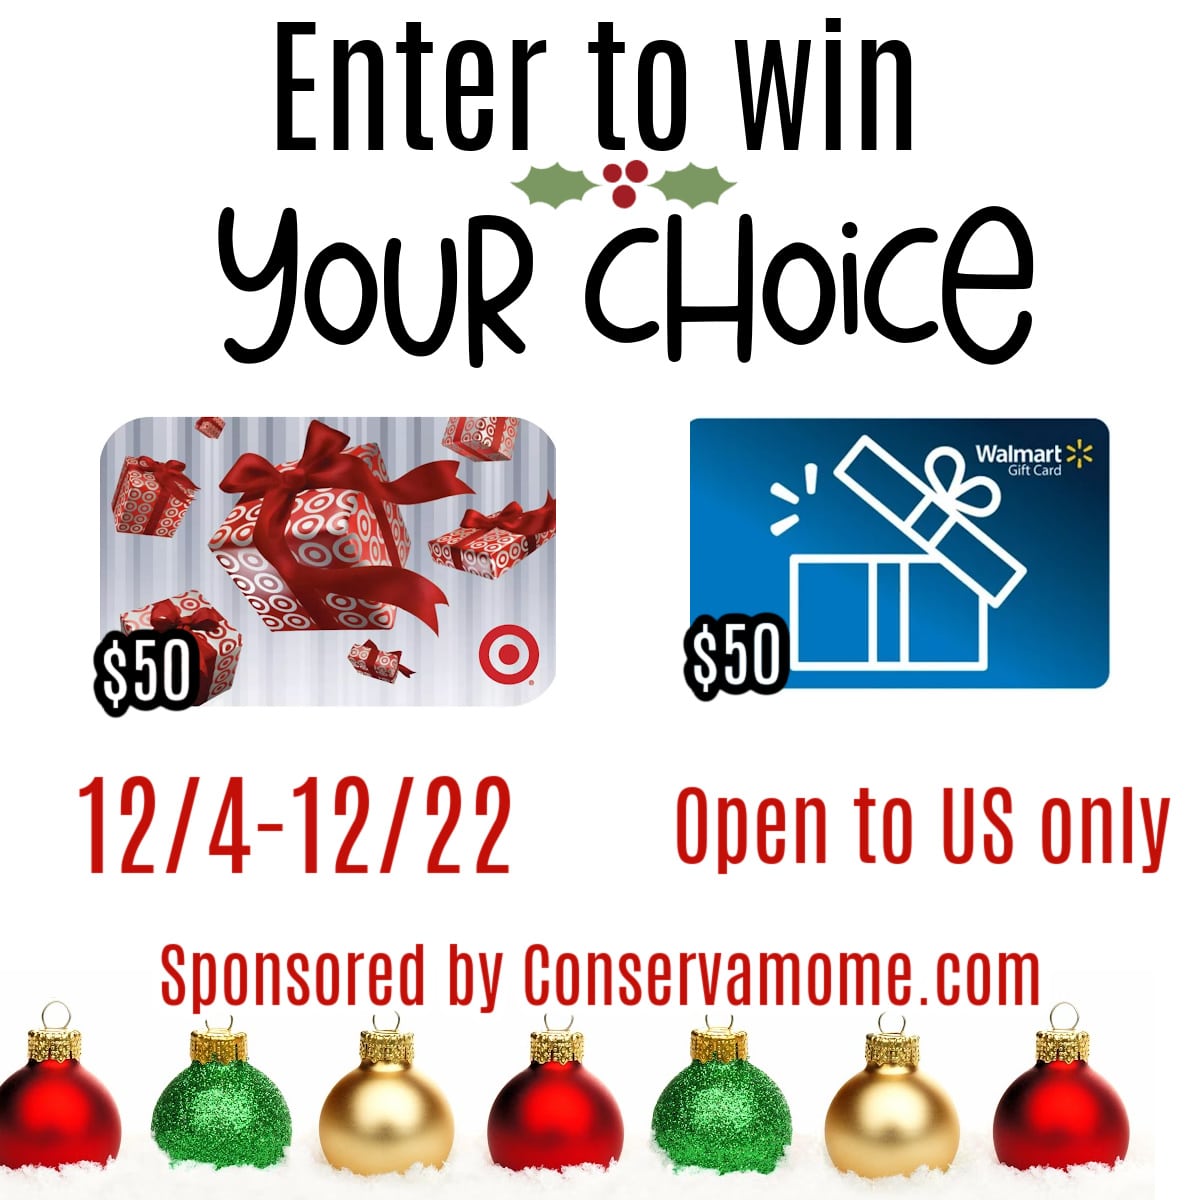 Enter to win your choice of a $50 Target or Walmart Gift Card Giveaway!